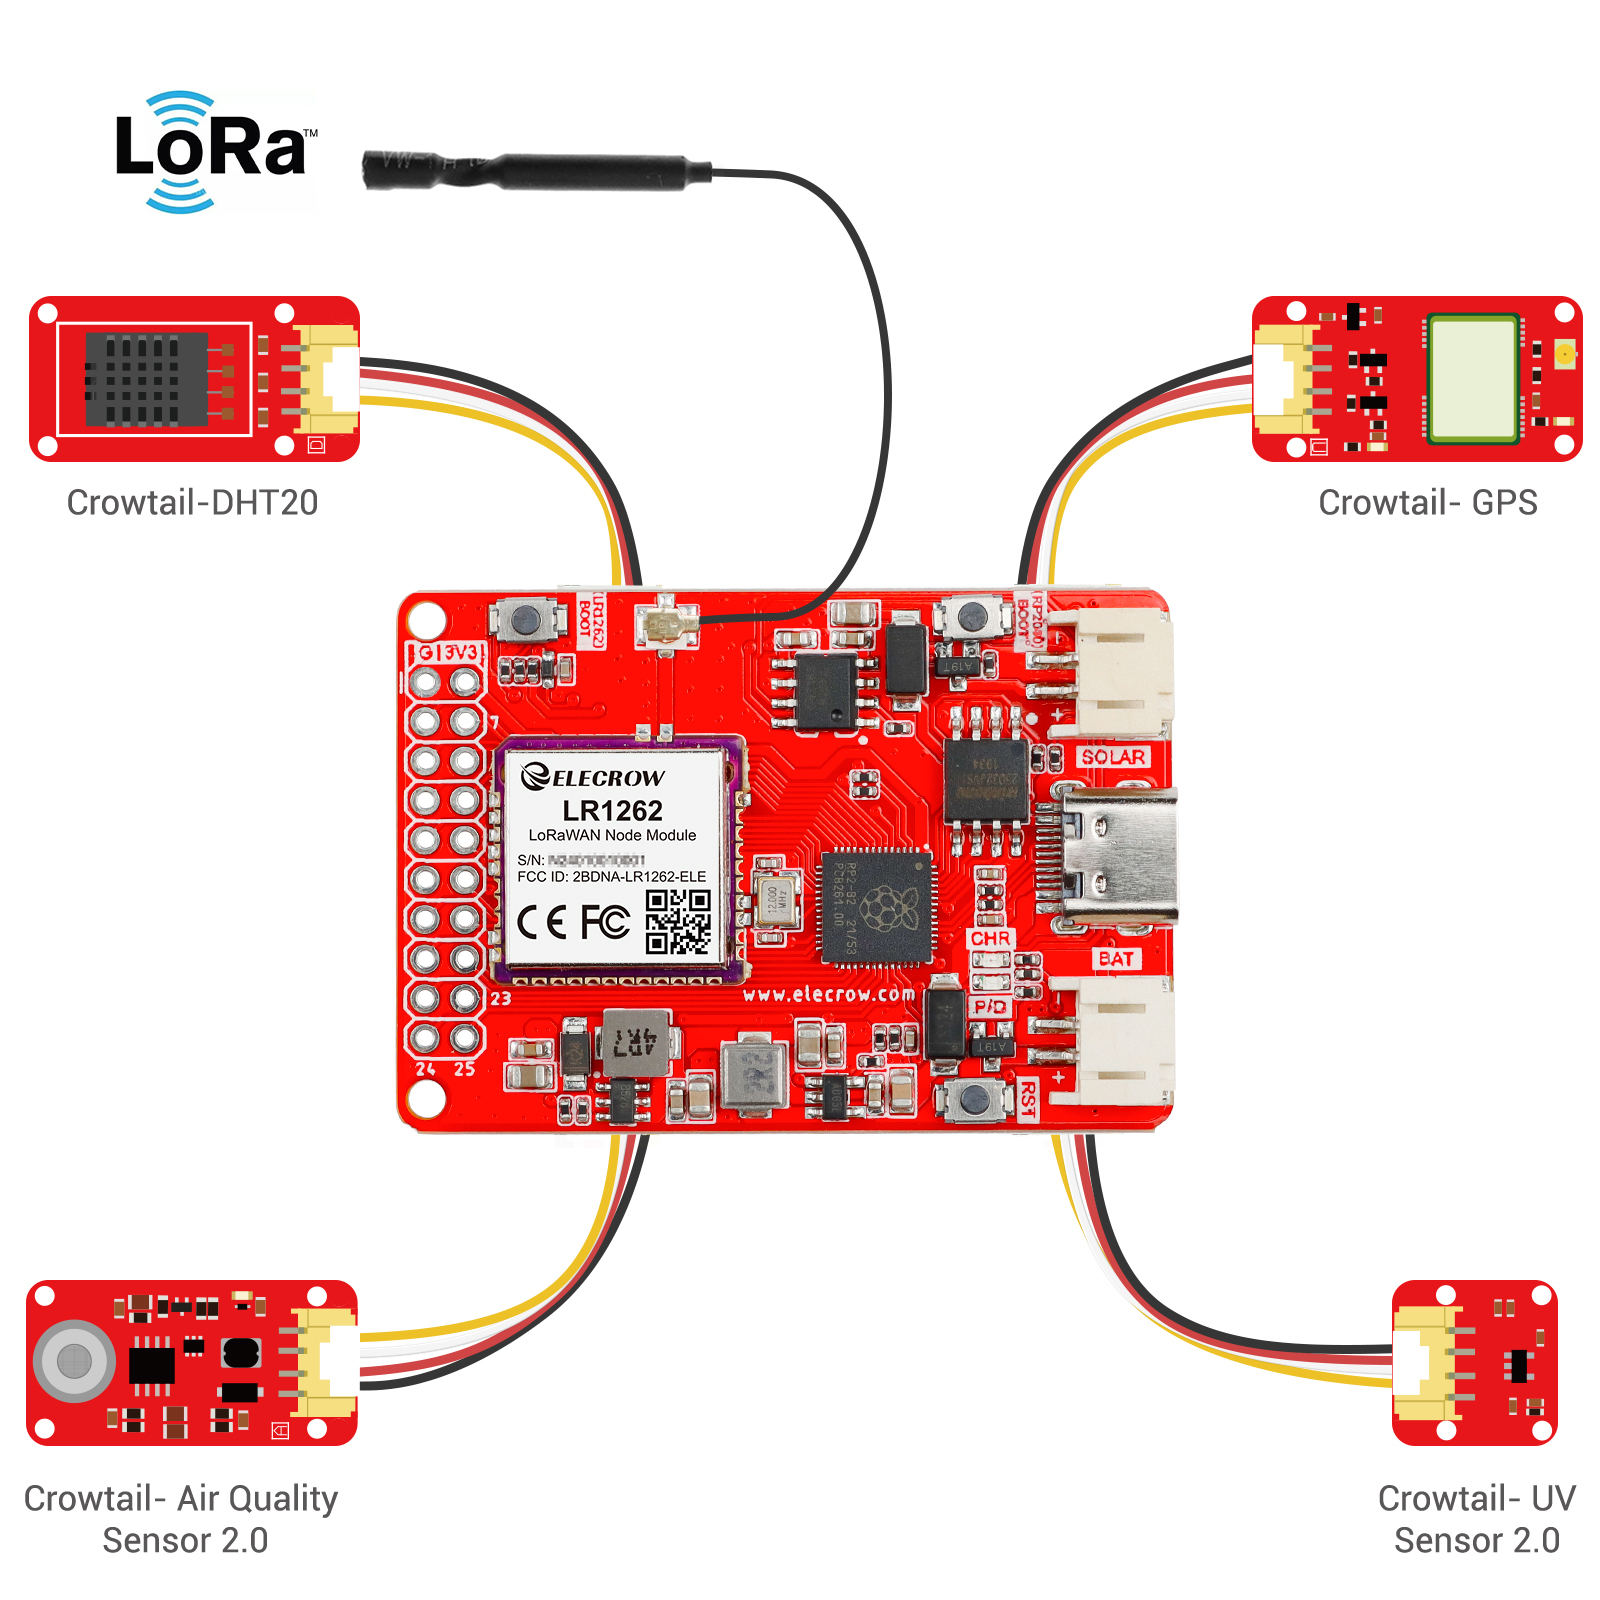 Lora node board connect with sensors